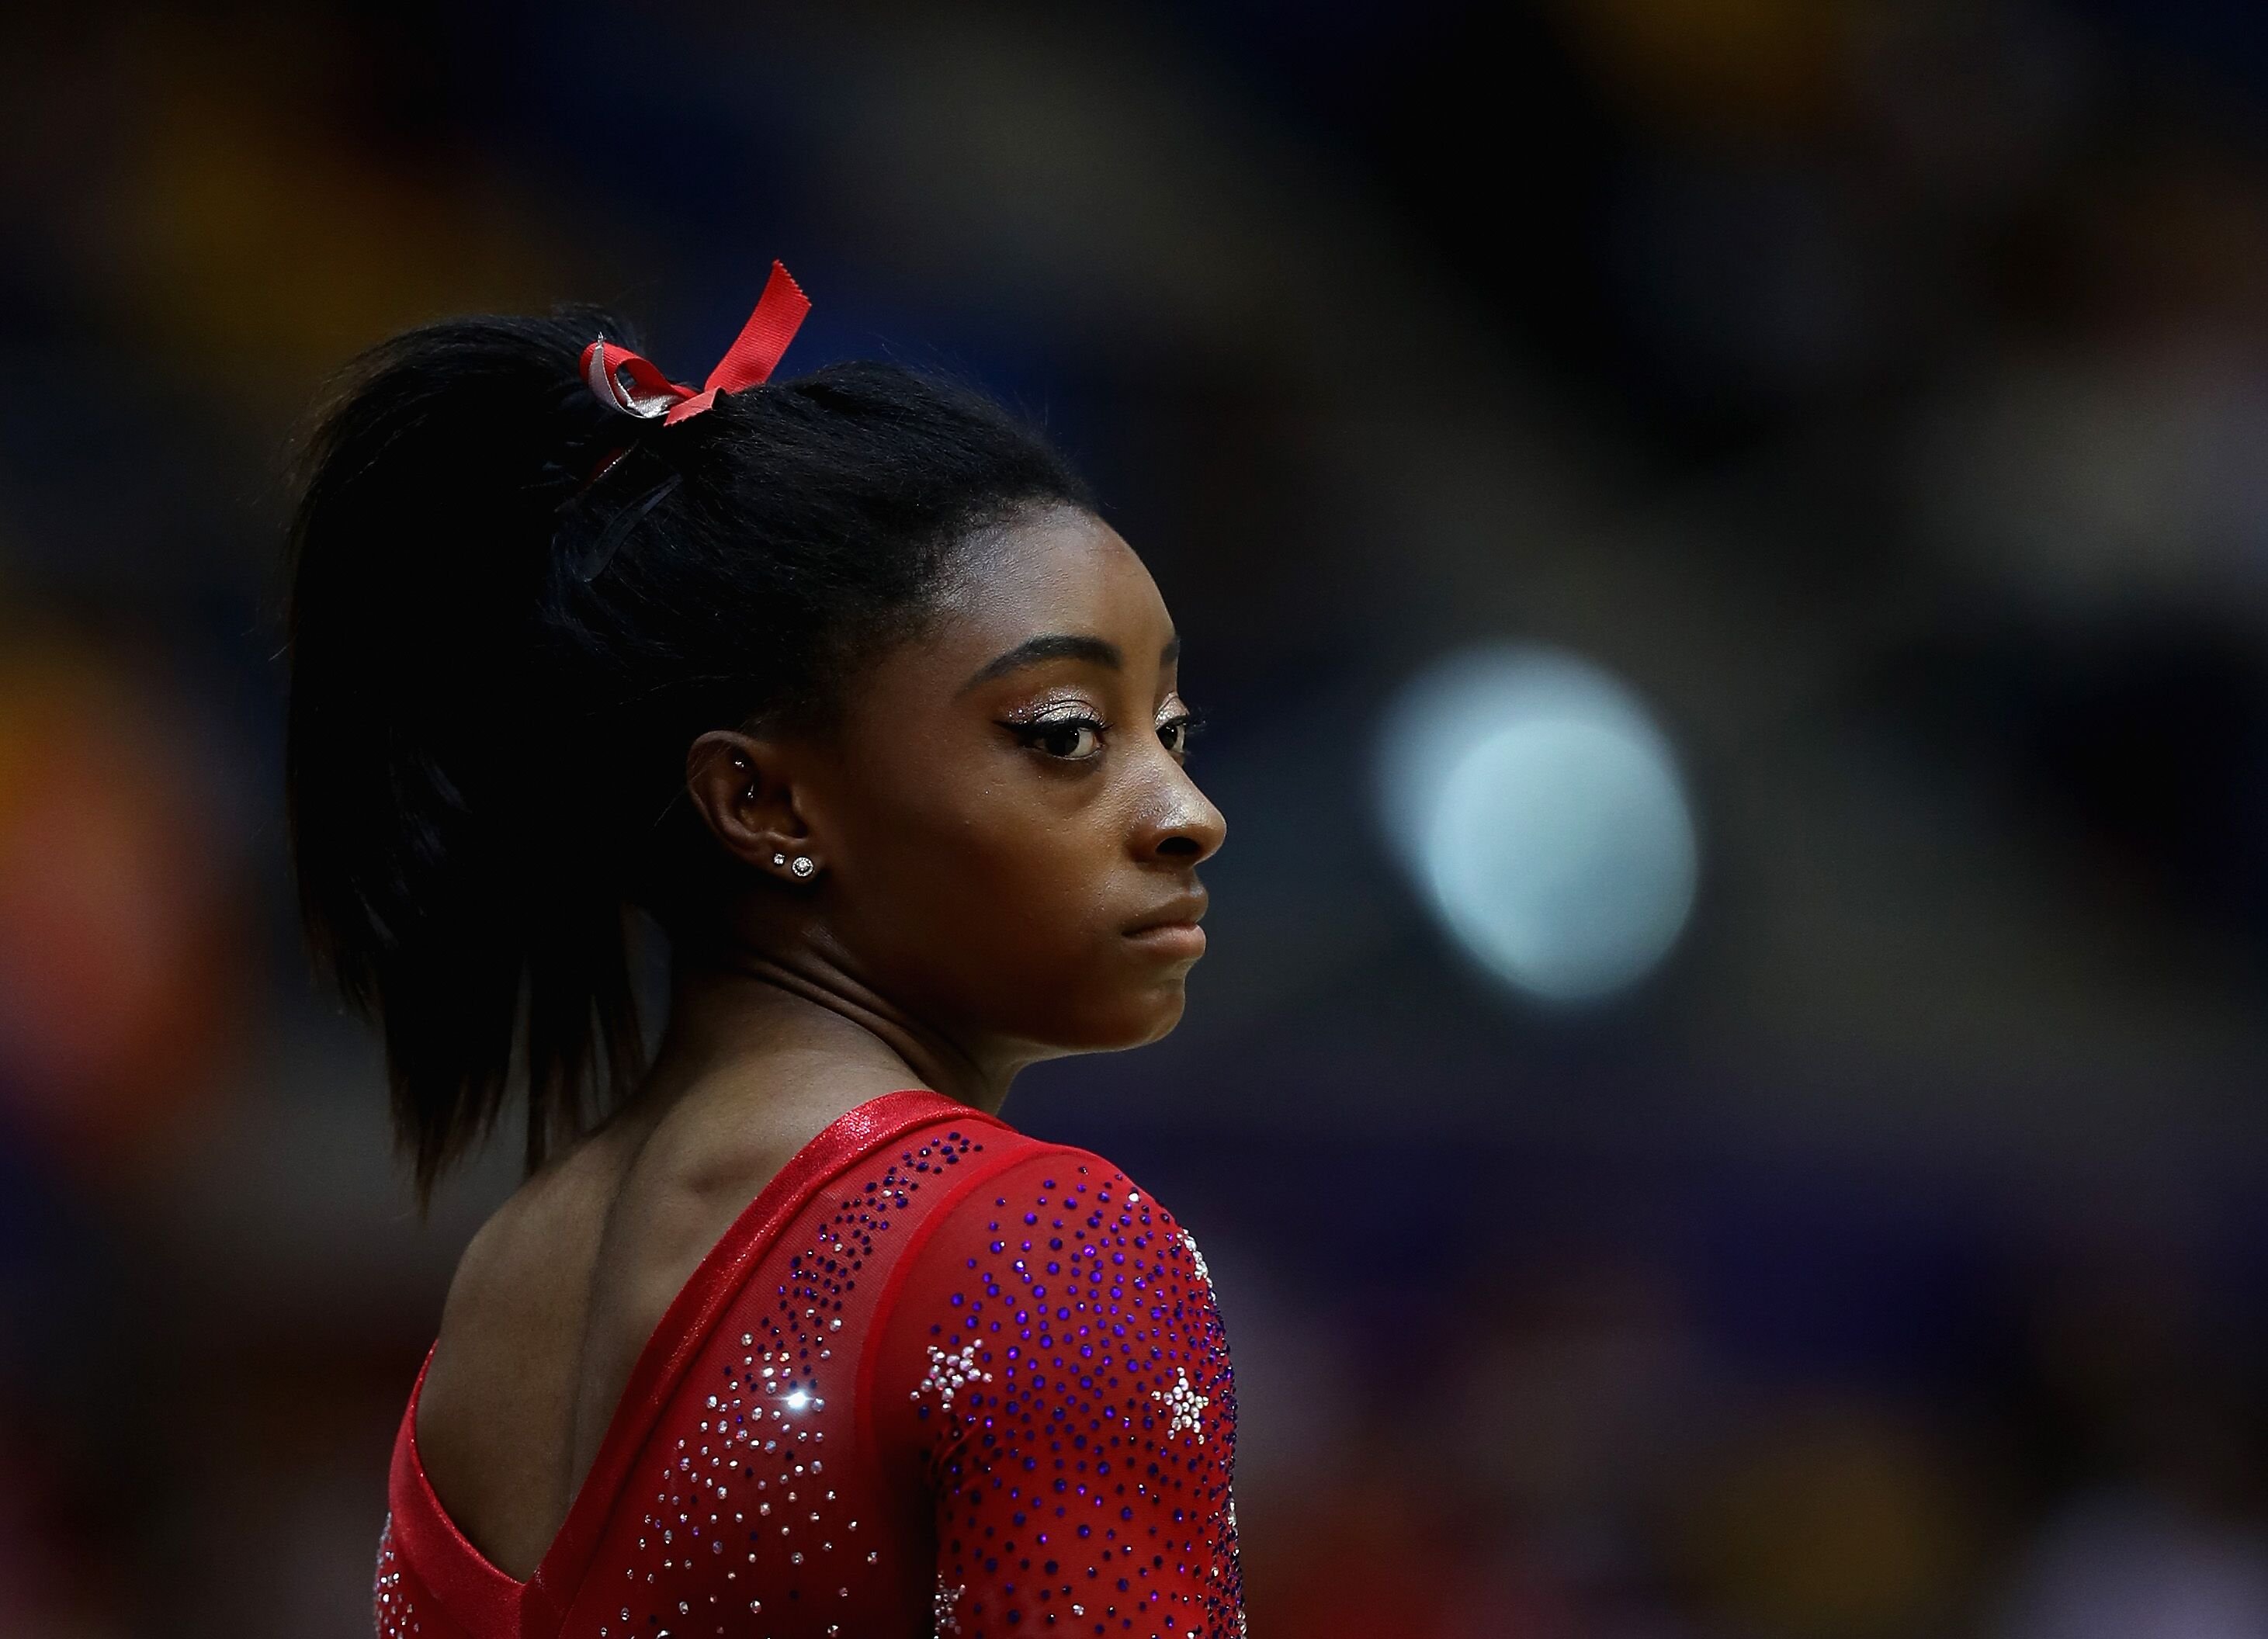 Simone Biles while at a gymnastics competition | Source: Getty Images/GlobalImagesUkraine